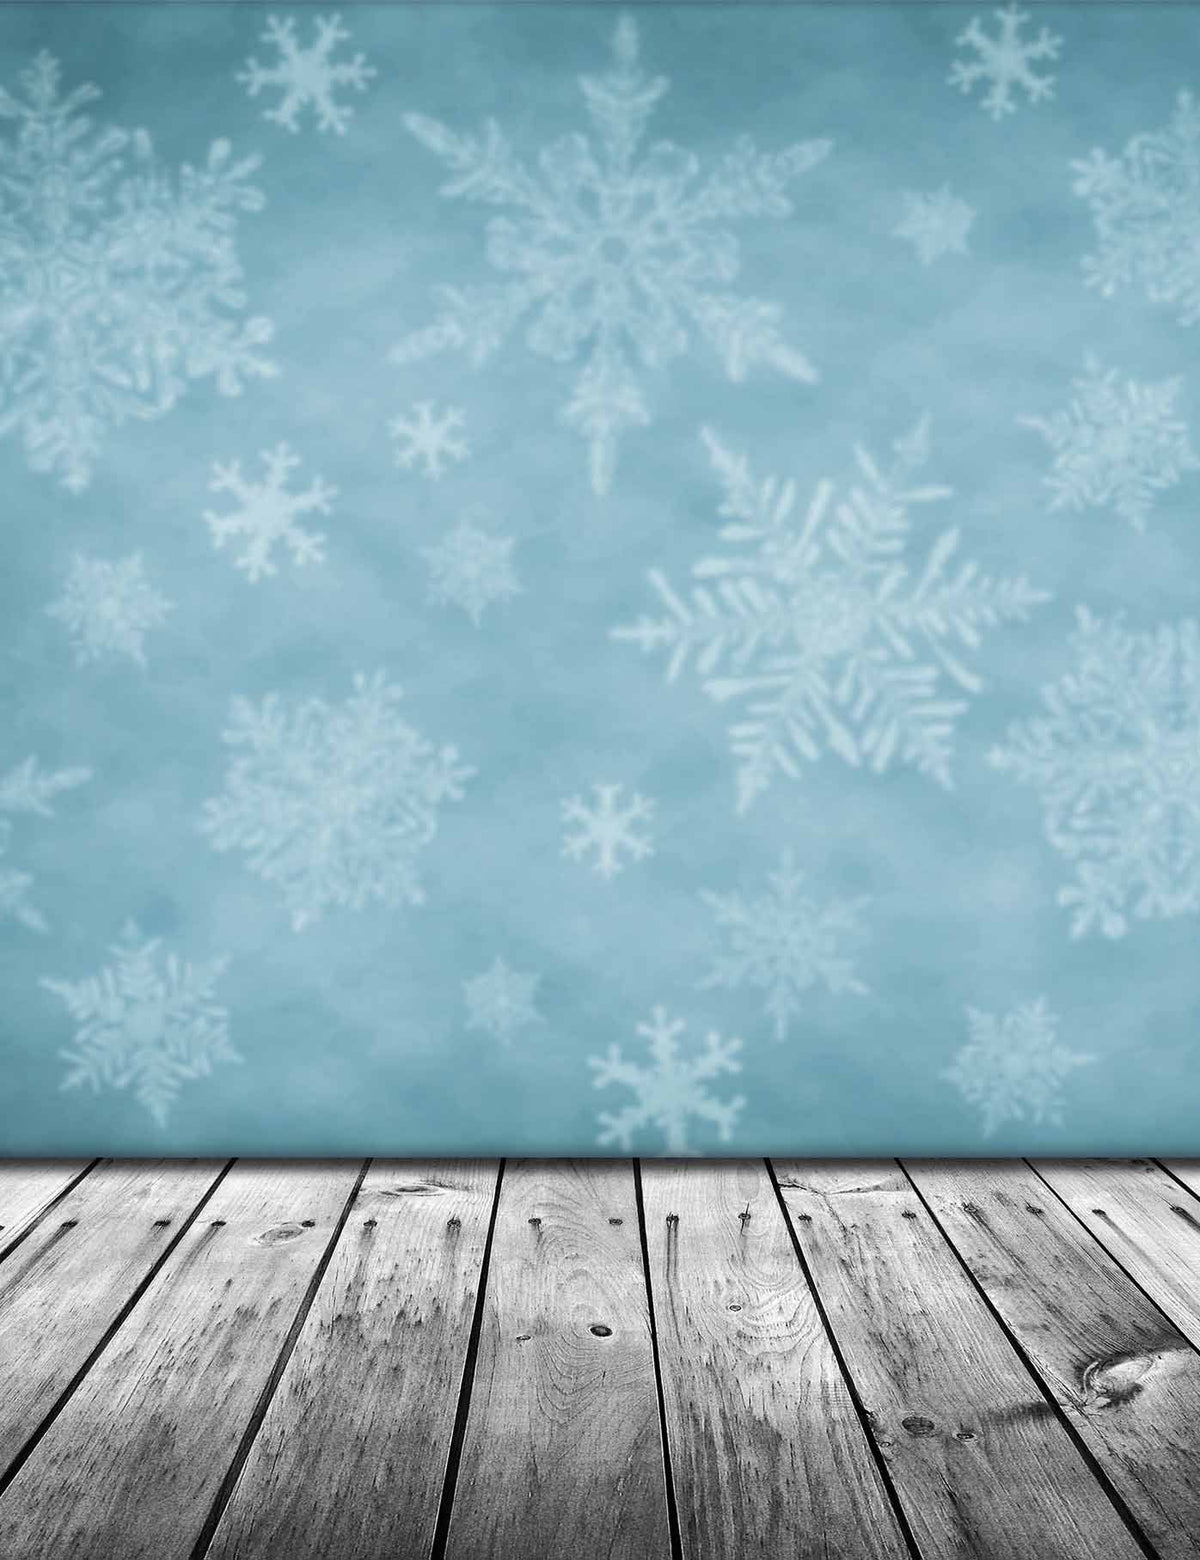 Snow Printed On Pale Blue Wall With Retro Wood Floor Backdrop For Photography Shopbackdrop